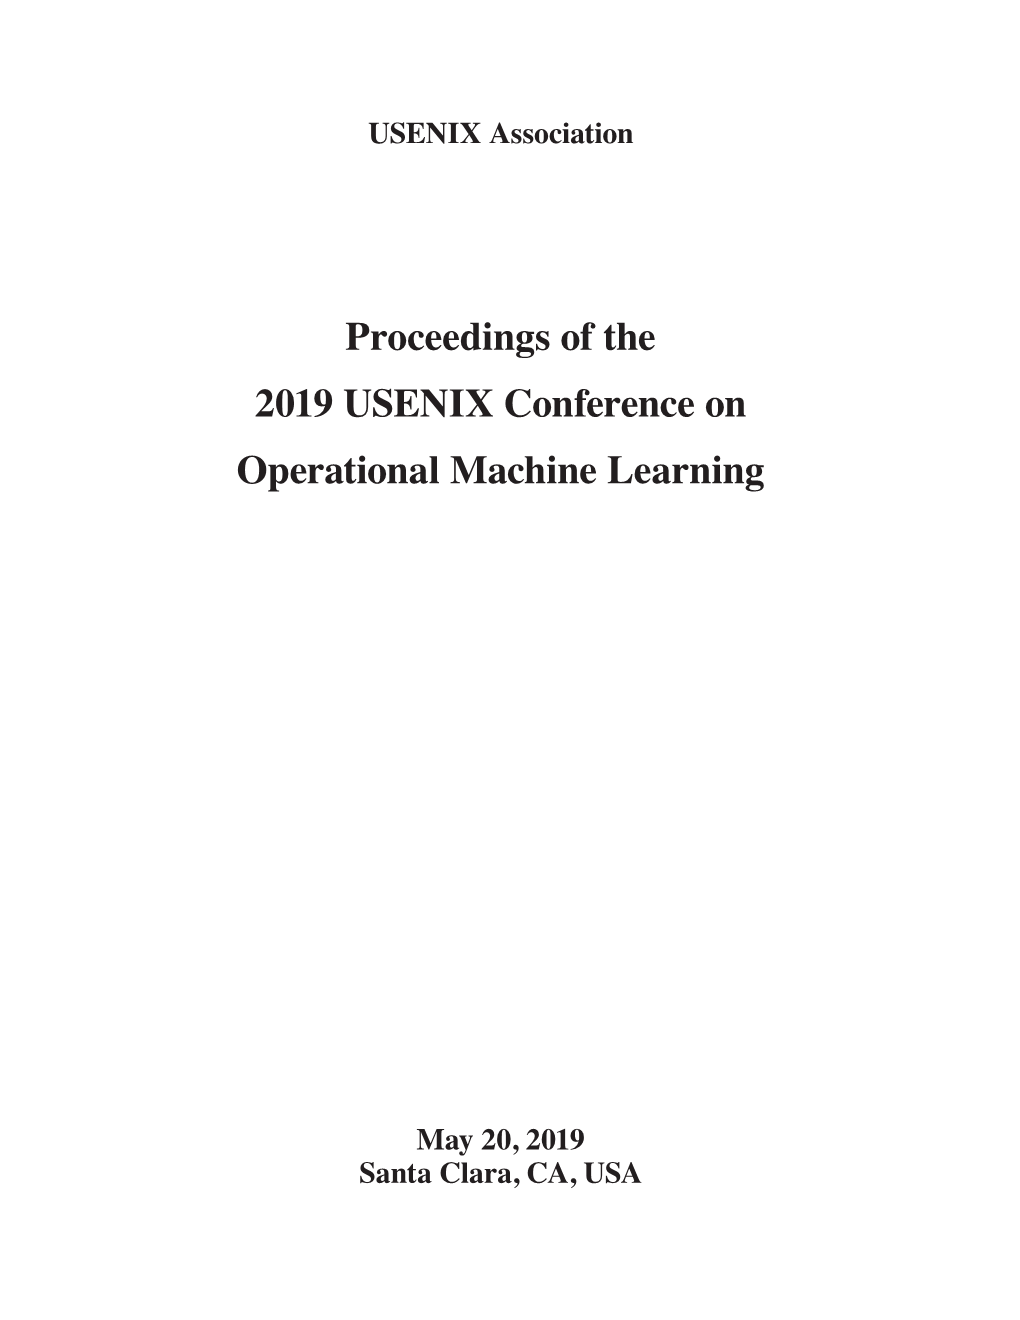 Proceedings of the 2019 USENIX Conference on Operational Machine Learning